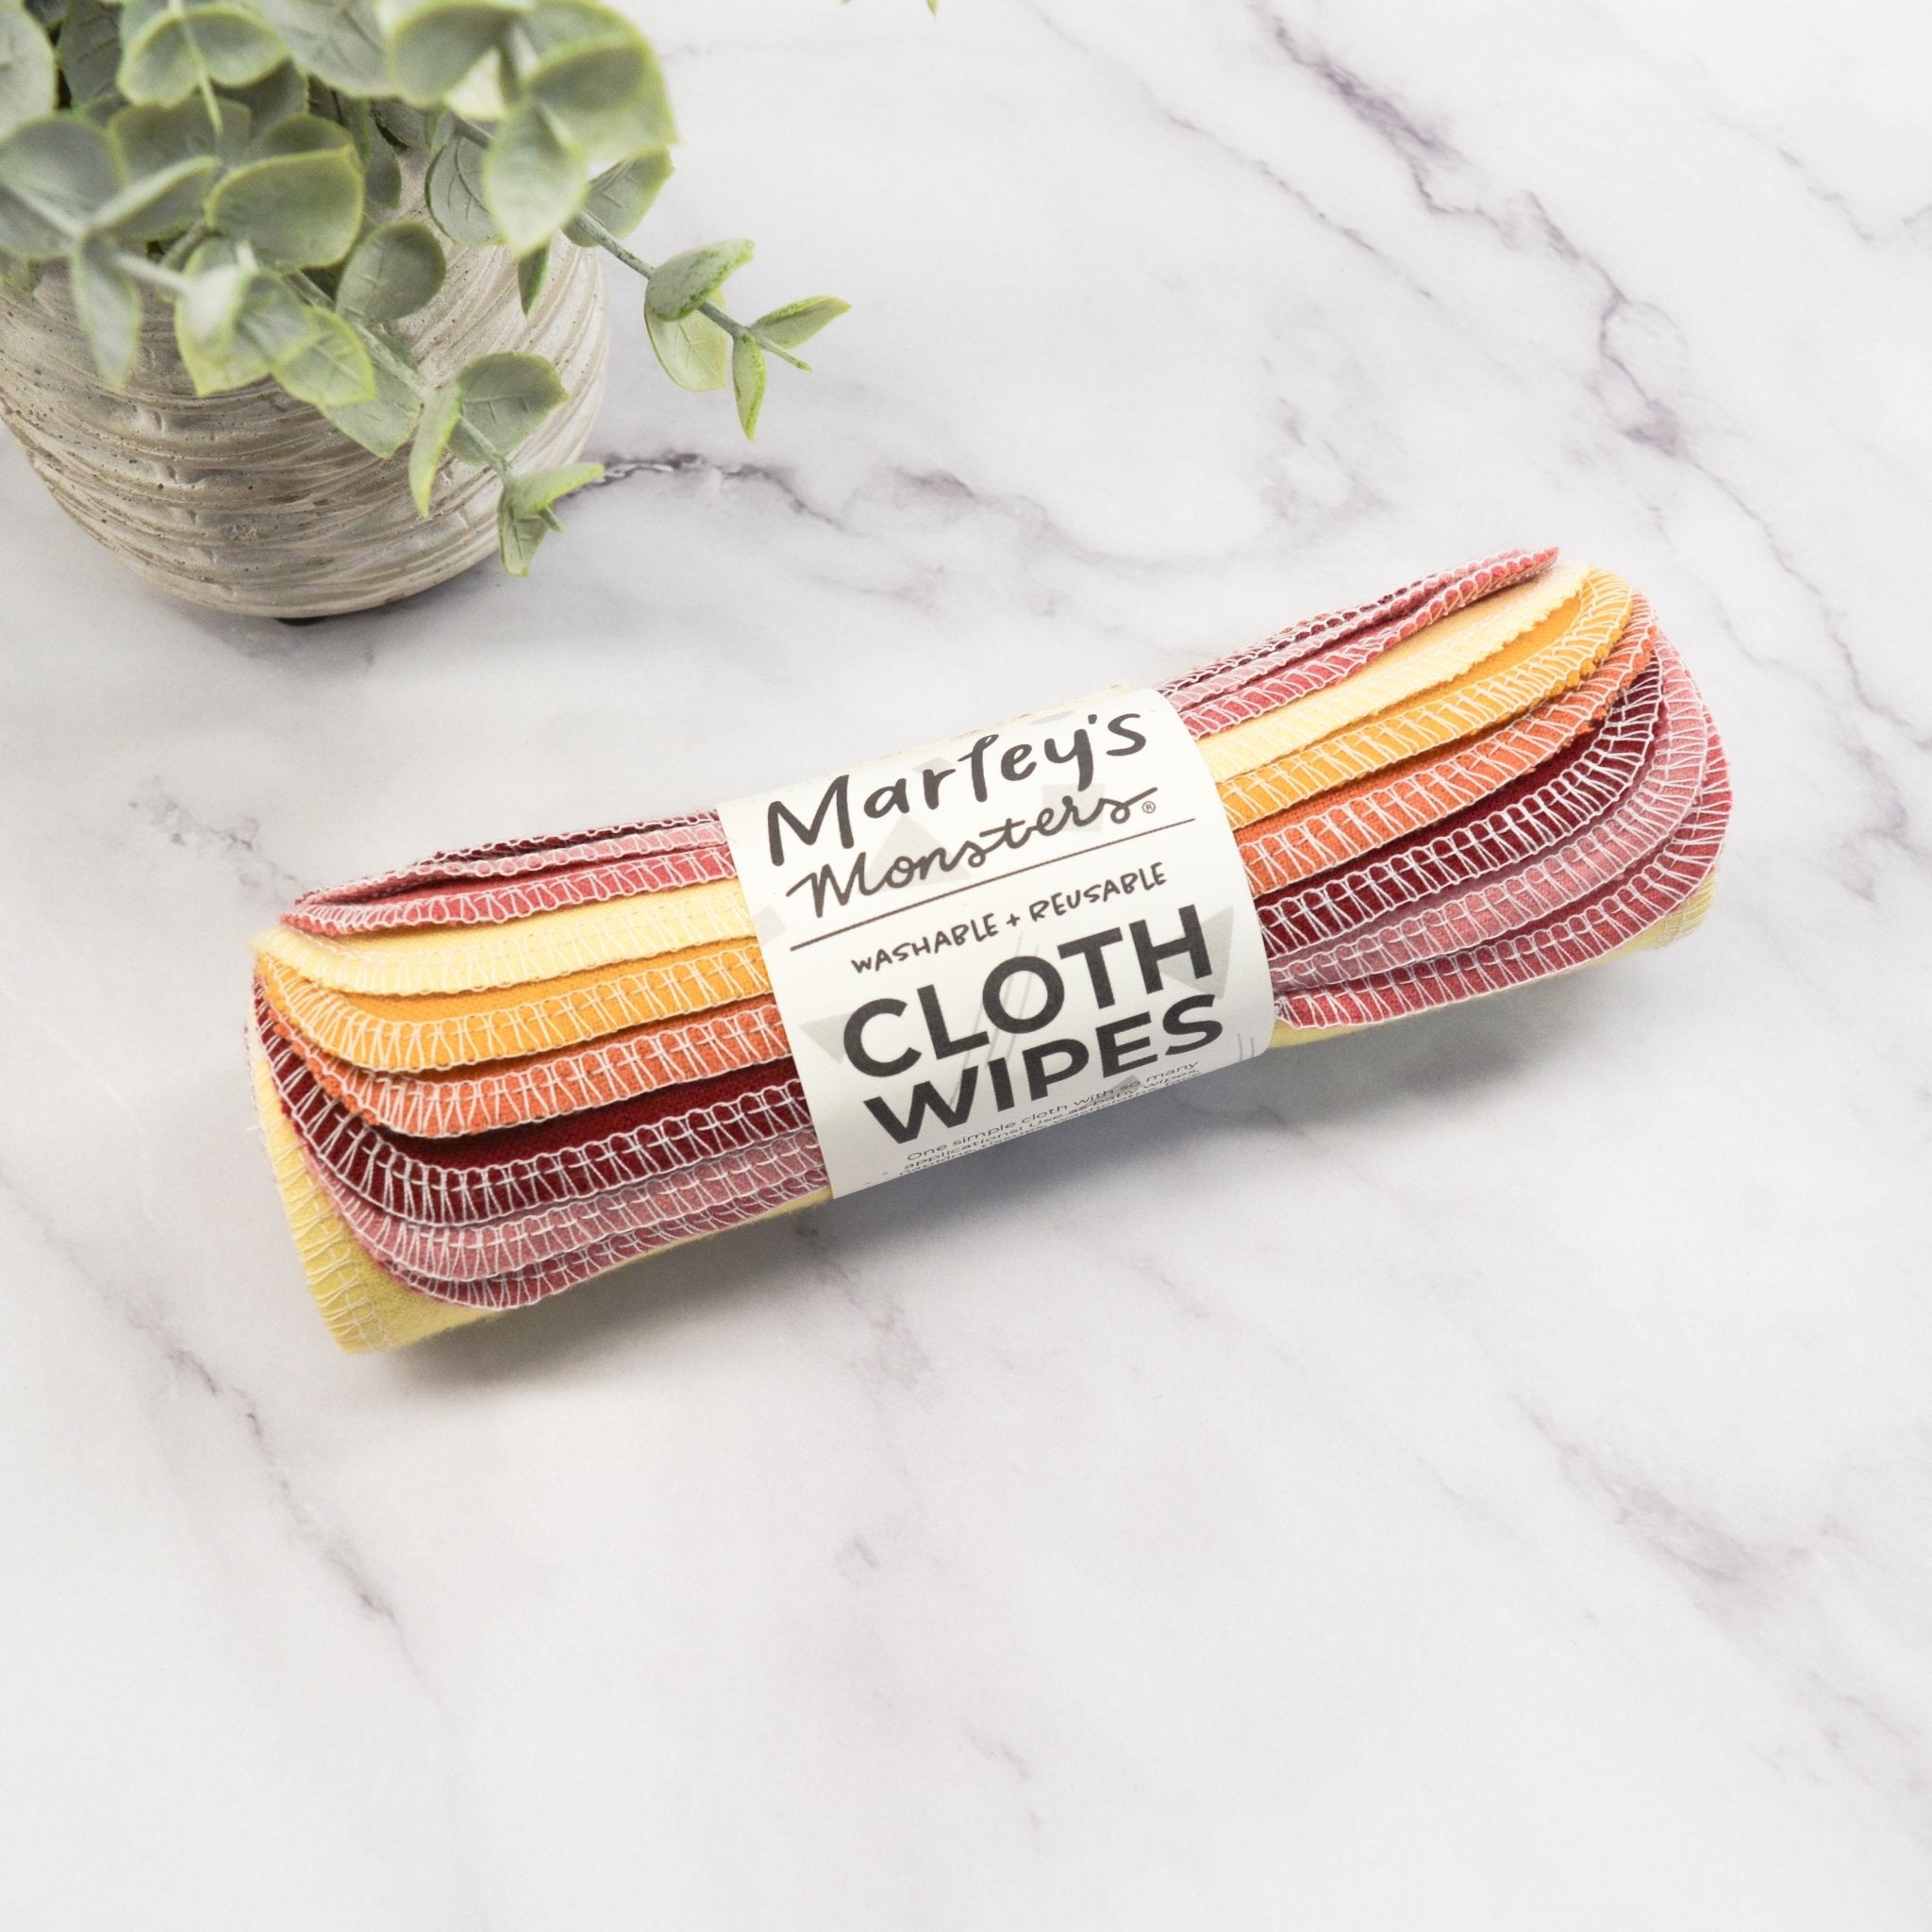 Cloth Wipes: Specialty Color Mixes - Marley's Monsters